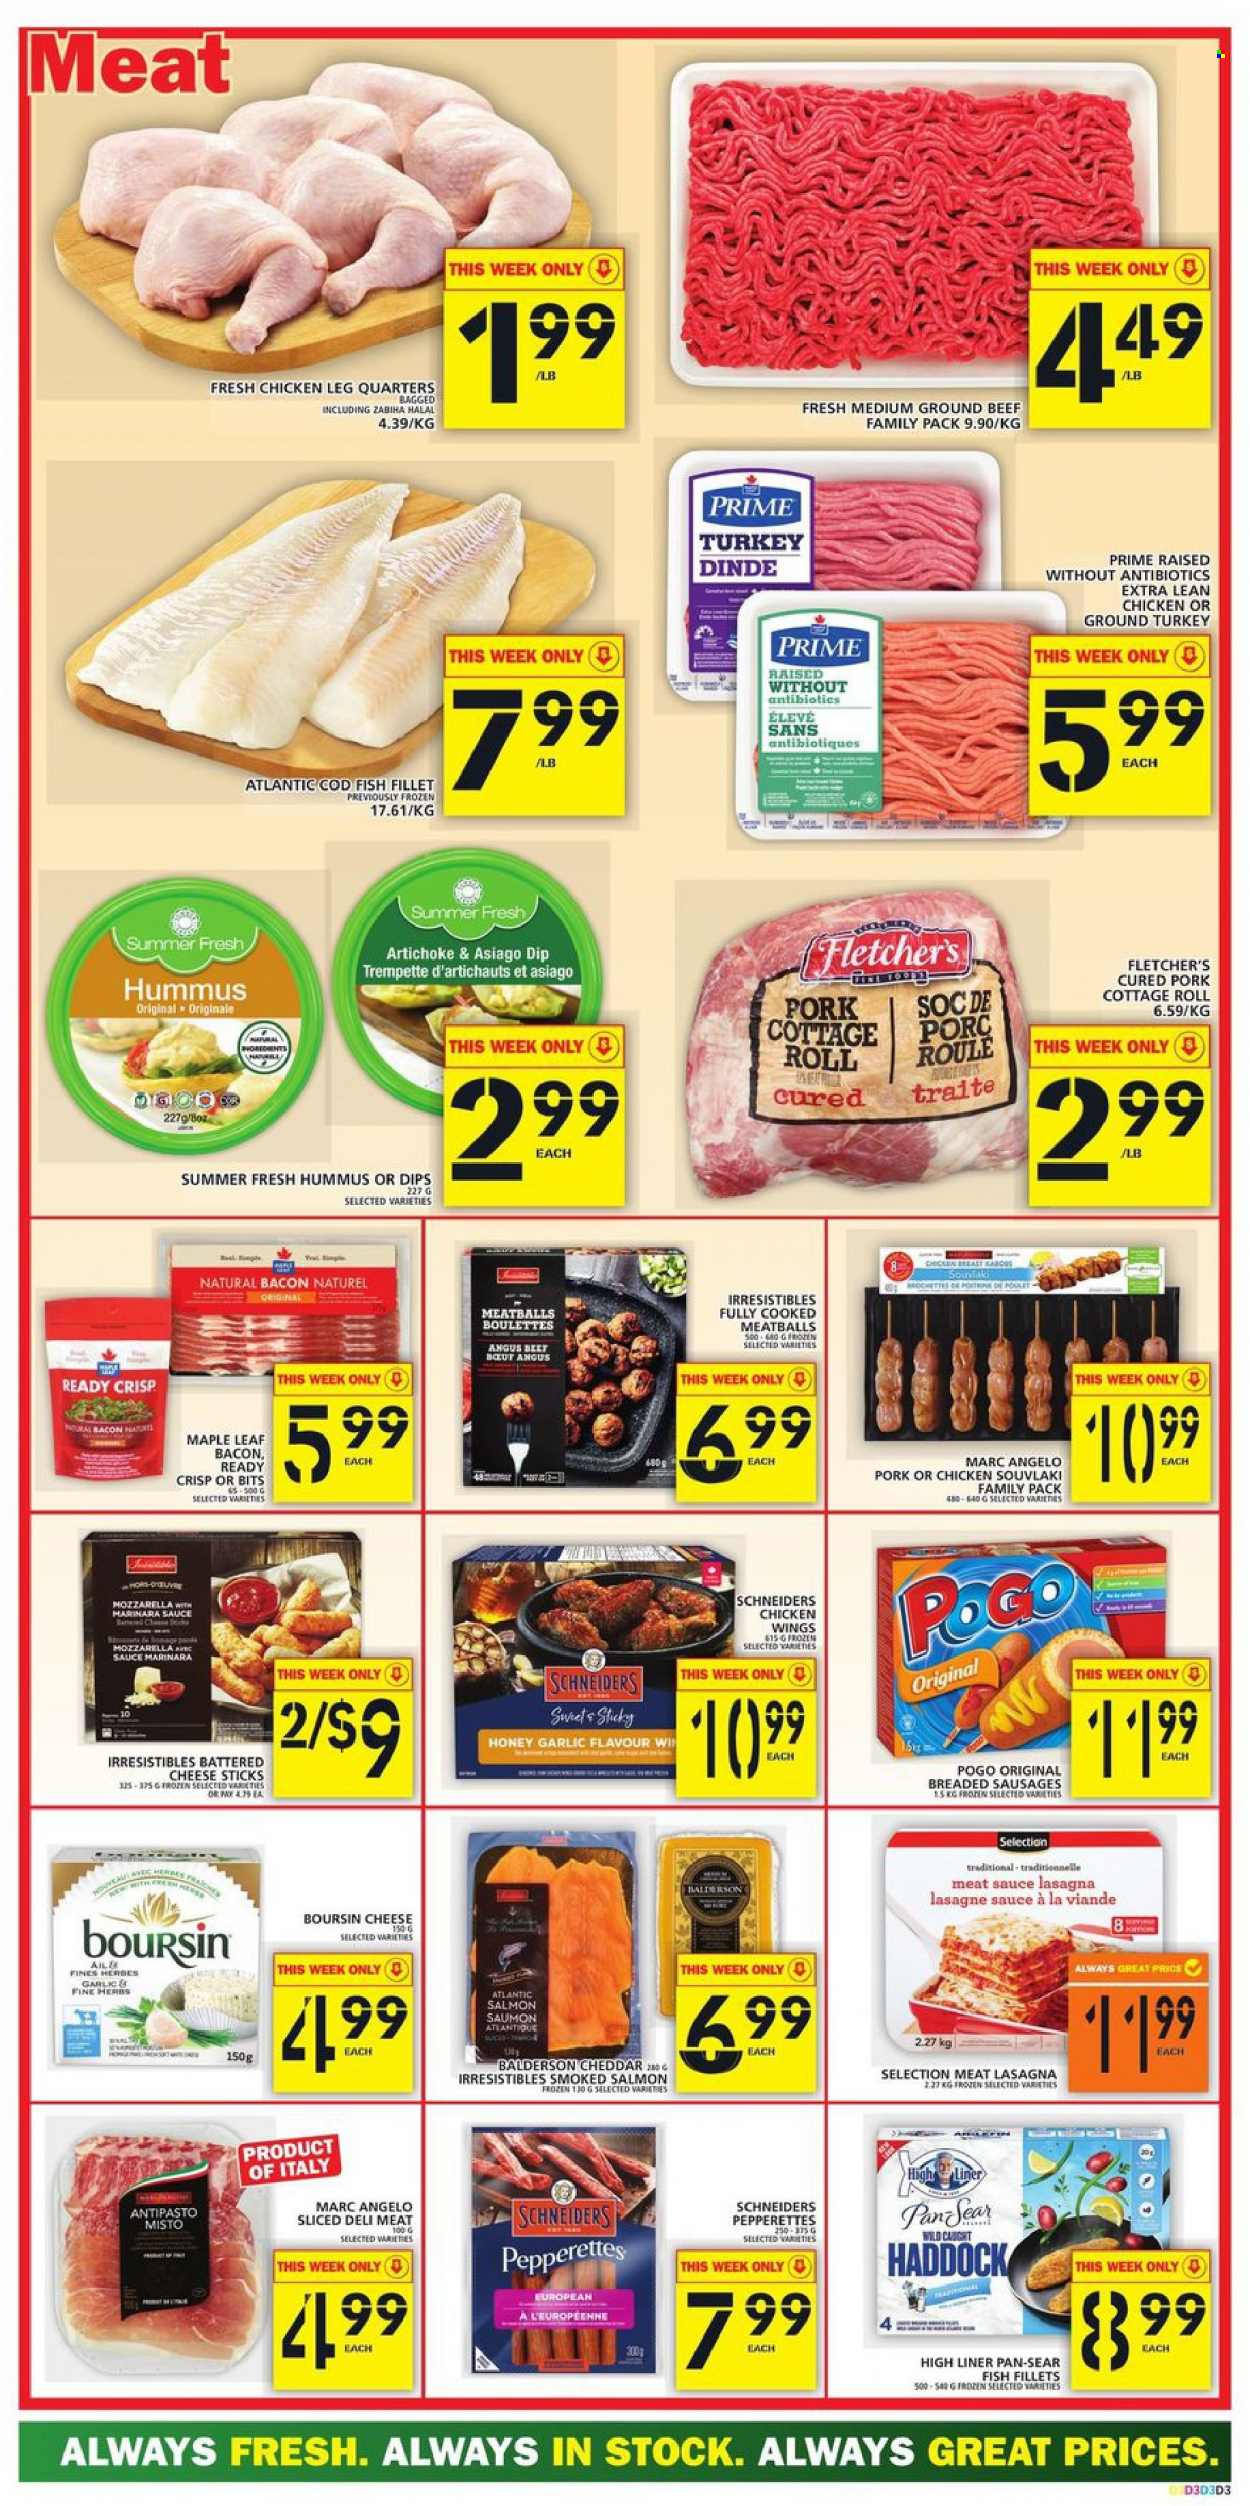 thumbnail - Food Basics Flyer - October 28, 2021 - November 03, 2021 - Sales products - cod, fish fillets, salmon, smoked salmon, haddock, fish, meatballs, sauce, lasagna meal, bacon, hummus, asiago, cheddar, cheese, dip, chicken wings, cheese sticks, herbs, honey, ground turkey, chicken legs, turkey, beef meat, ground beef, pan. Page 3.